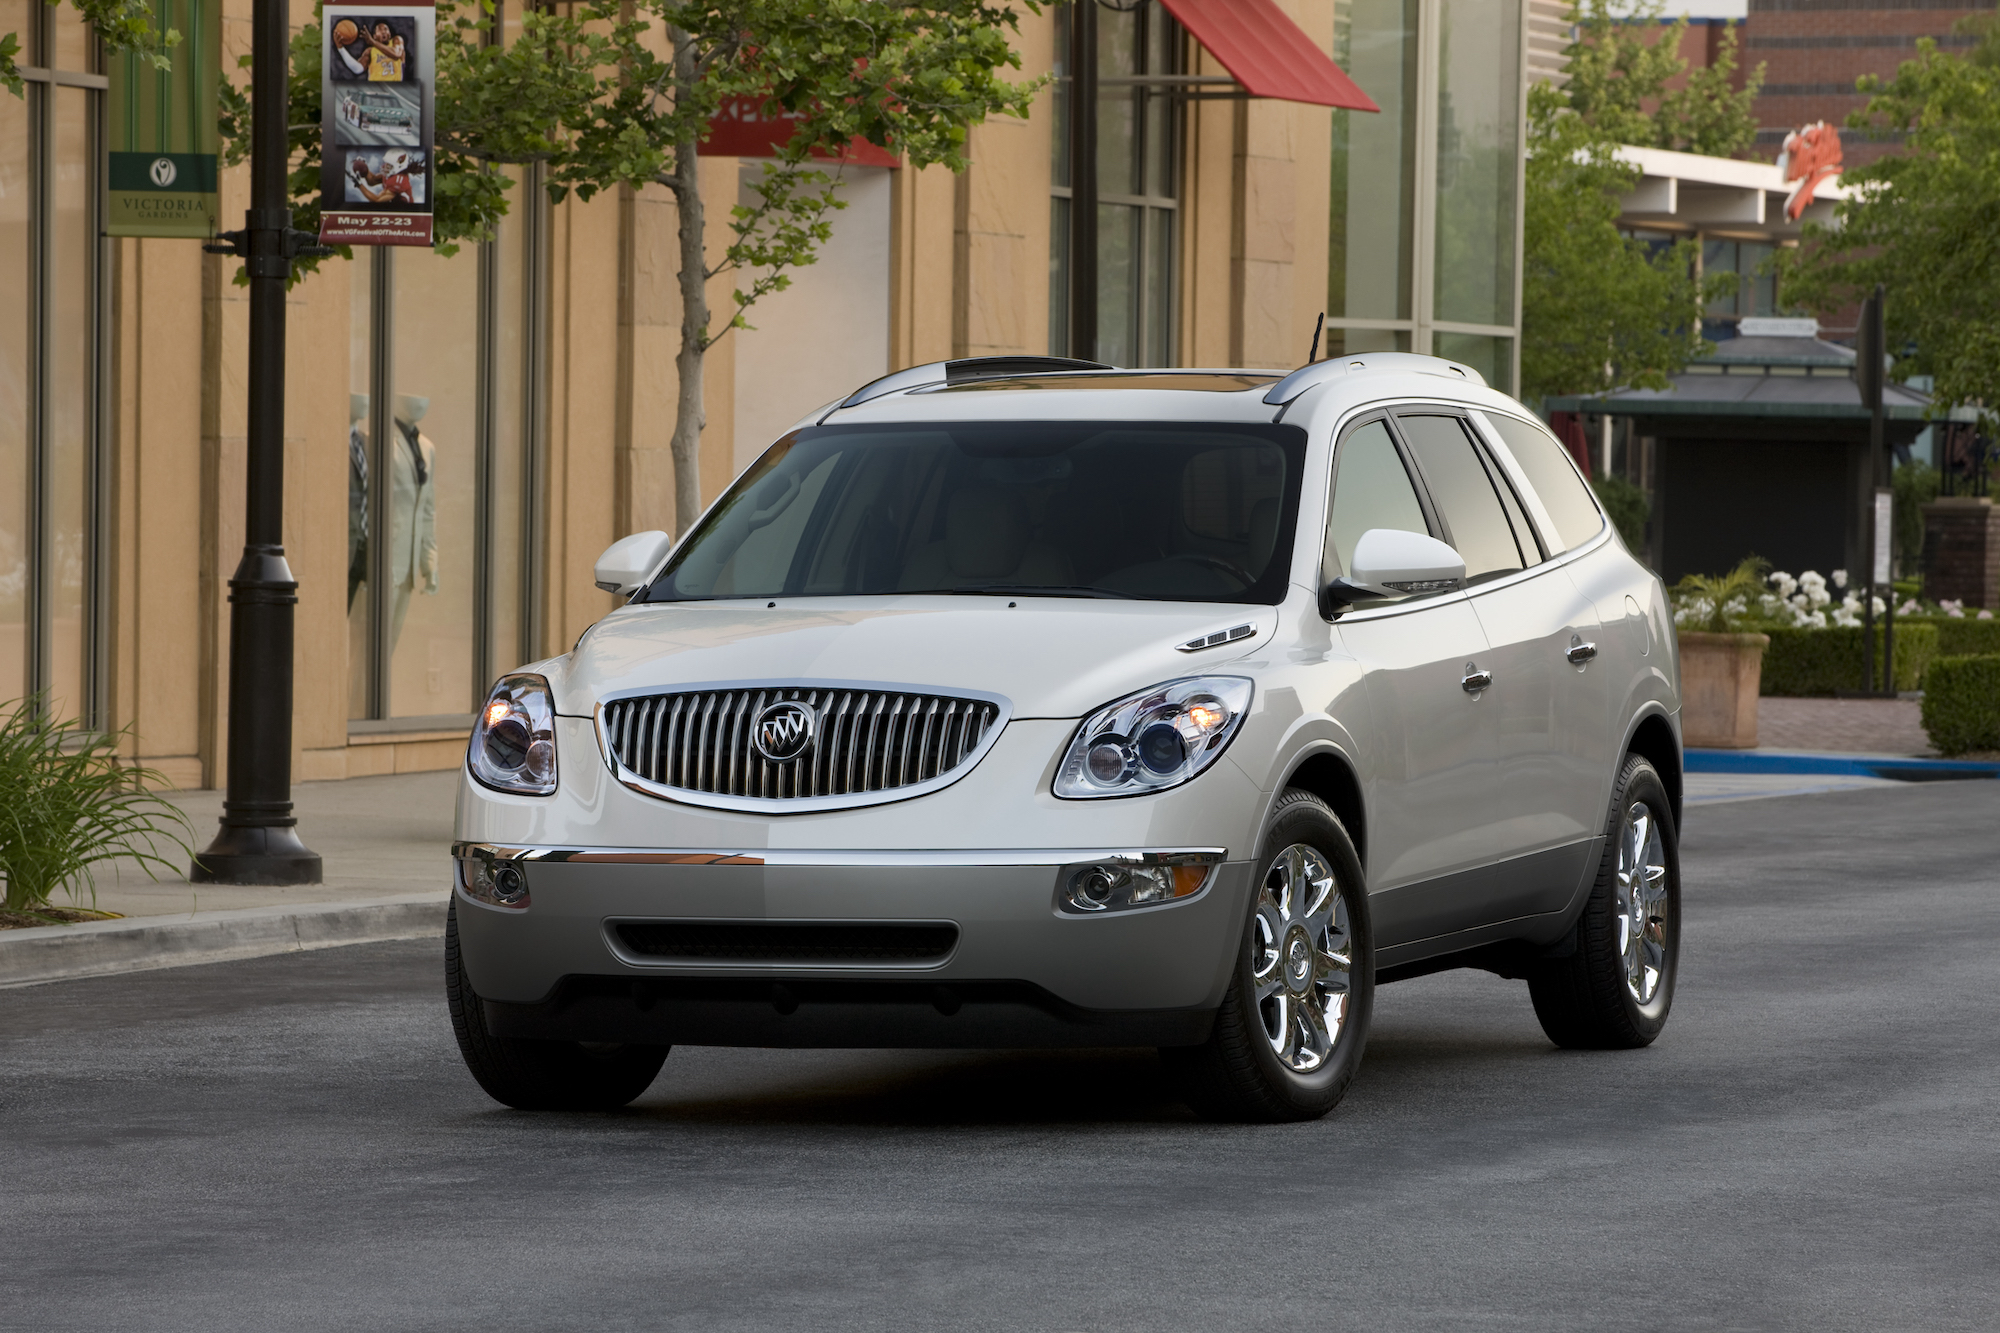 A white 2012 Buick Enclave luxury crossover SUV stopped on a city street